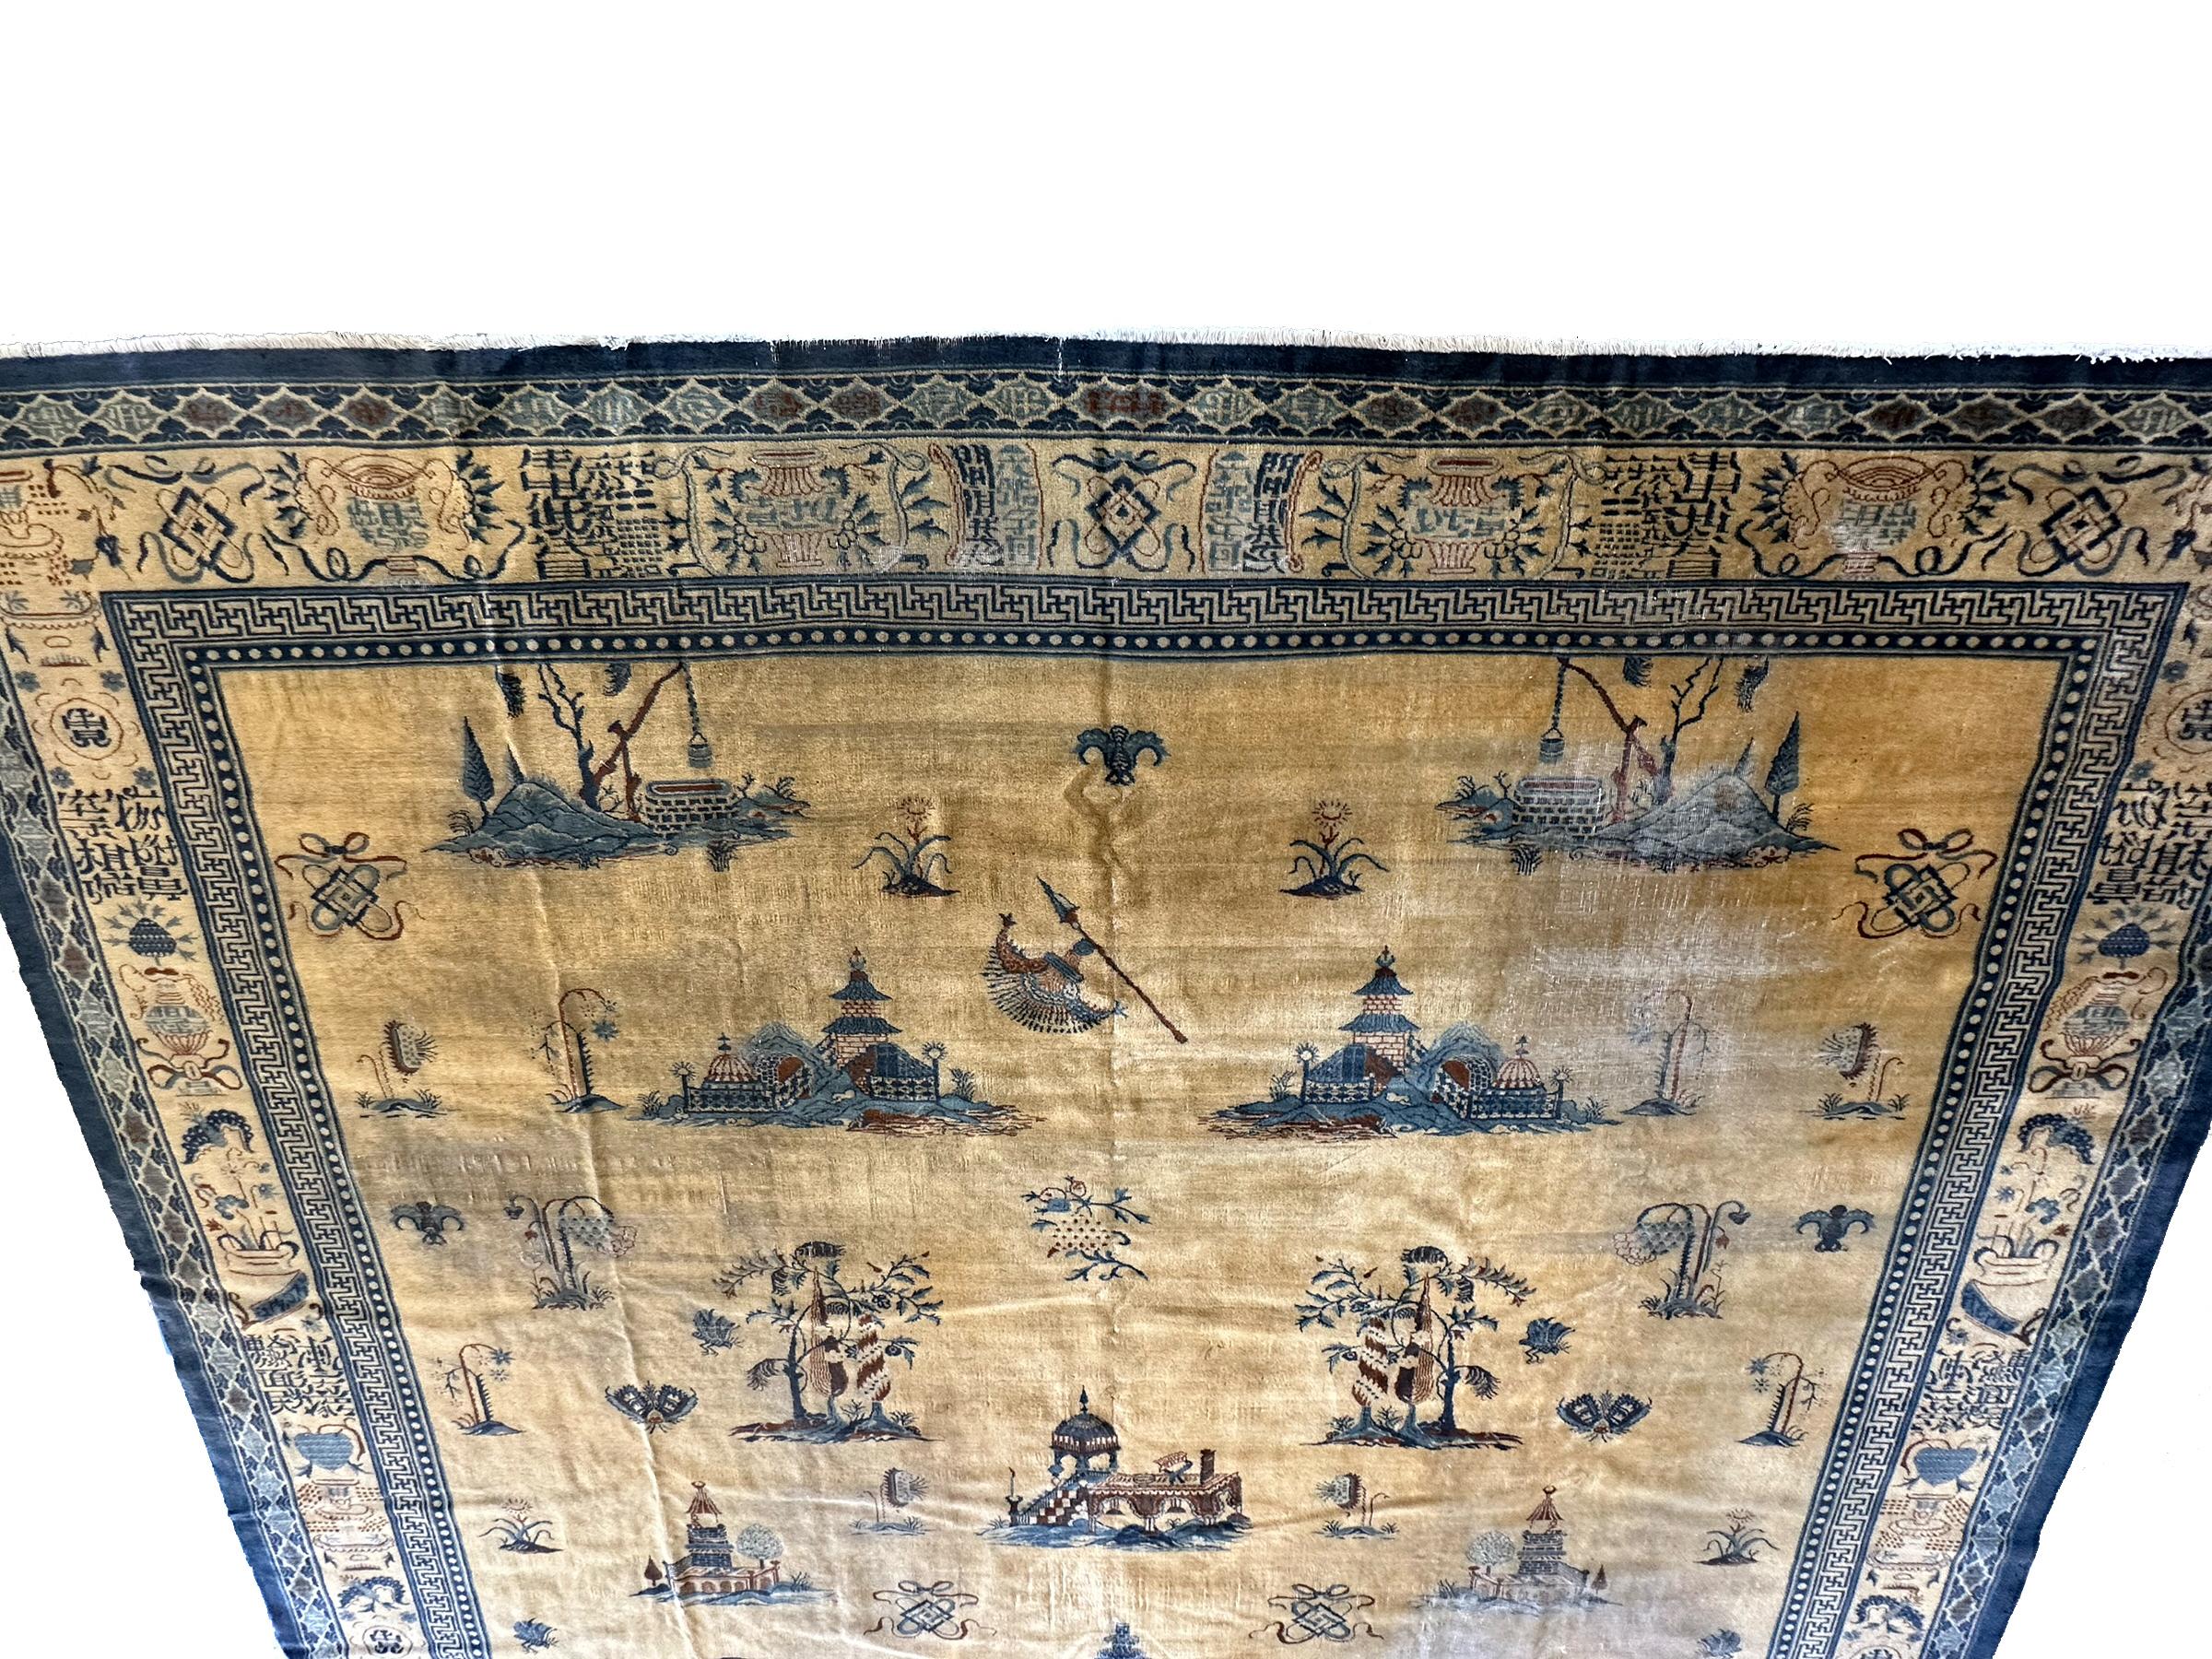 Hand-Knotted Rare Antique Chinese Rug Pre-1900 Chinese Symbols 12x15 361cm x 427cm Pre-1900 For Sale